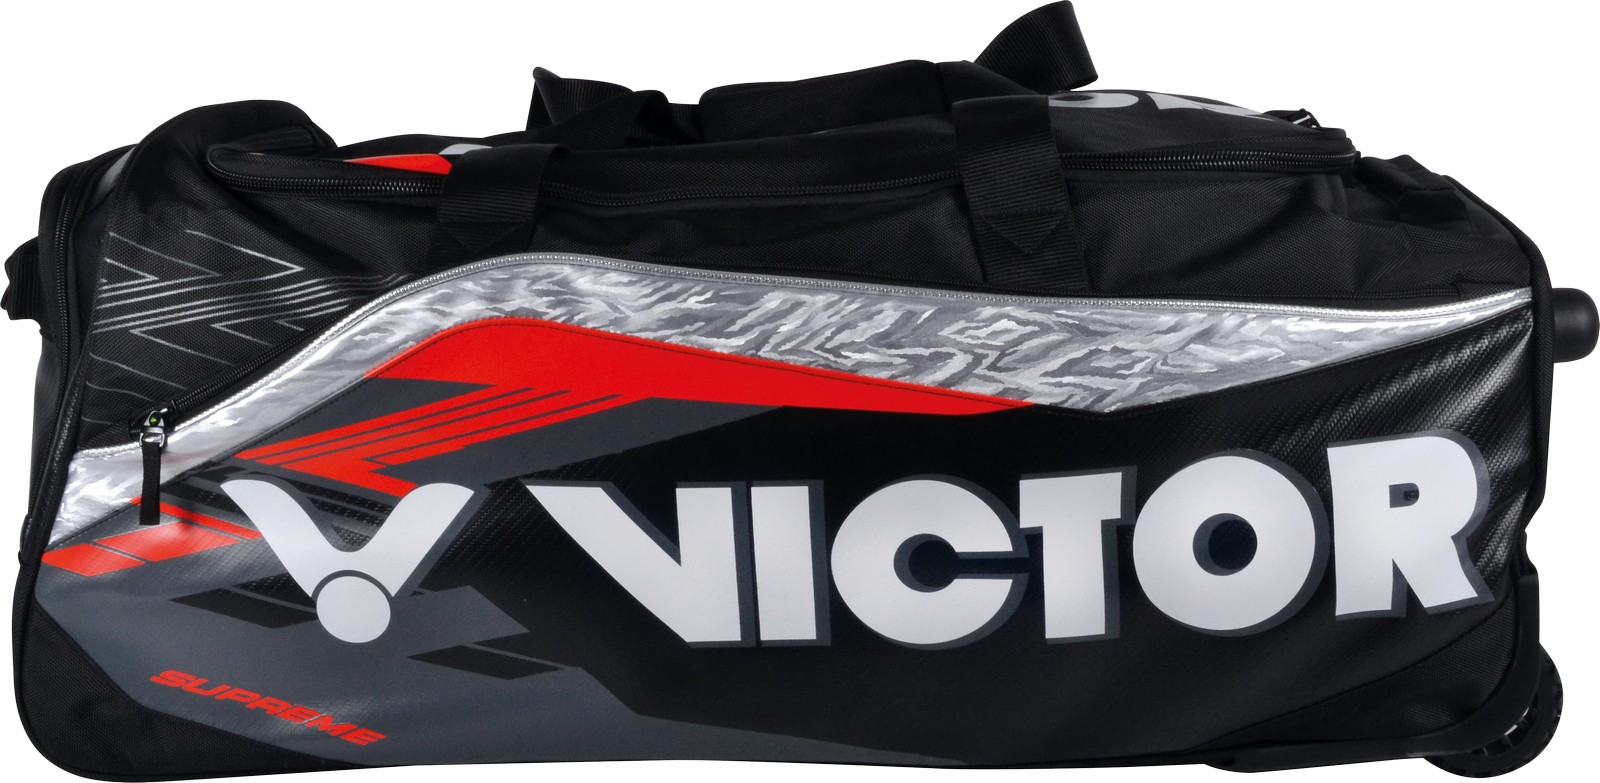 Victor_Multisportbags large